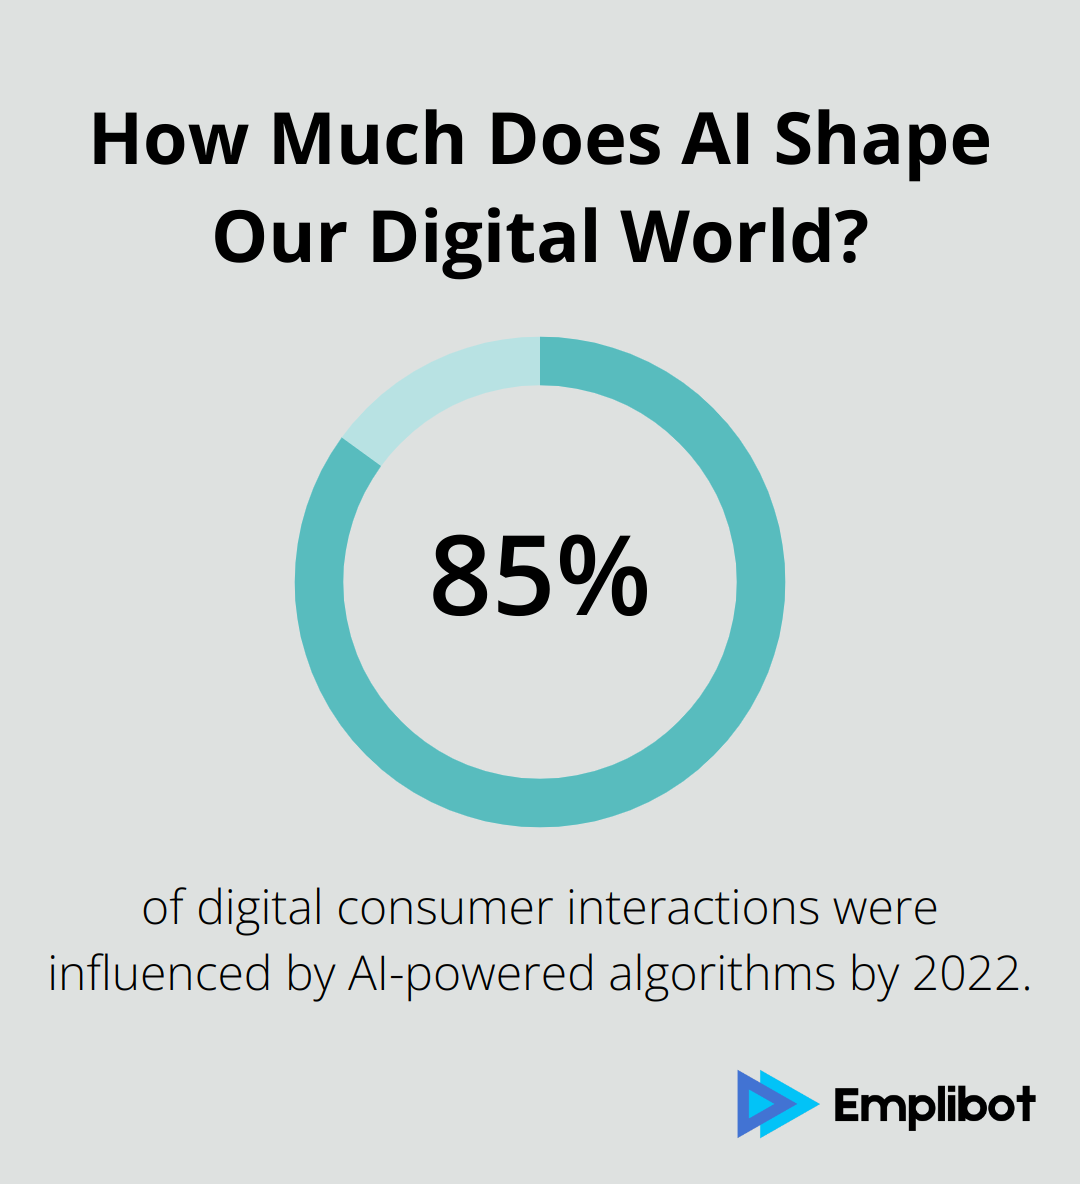 How Much Does AI Shape Our Digital World?